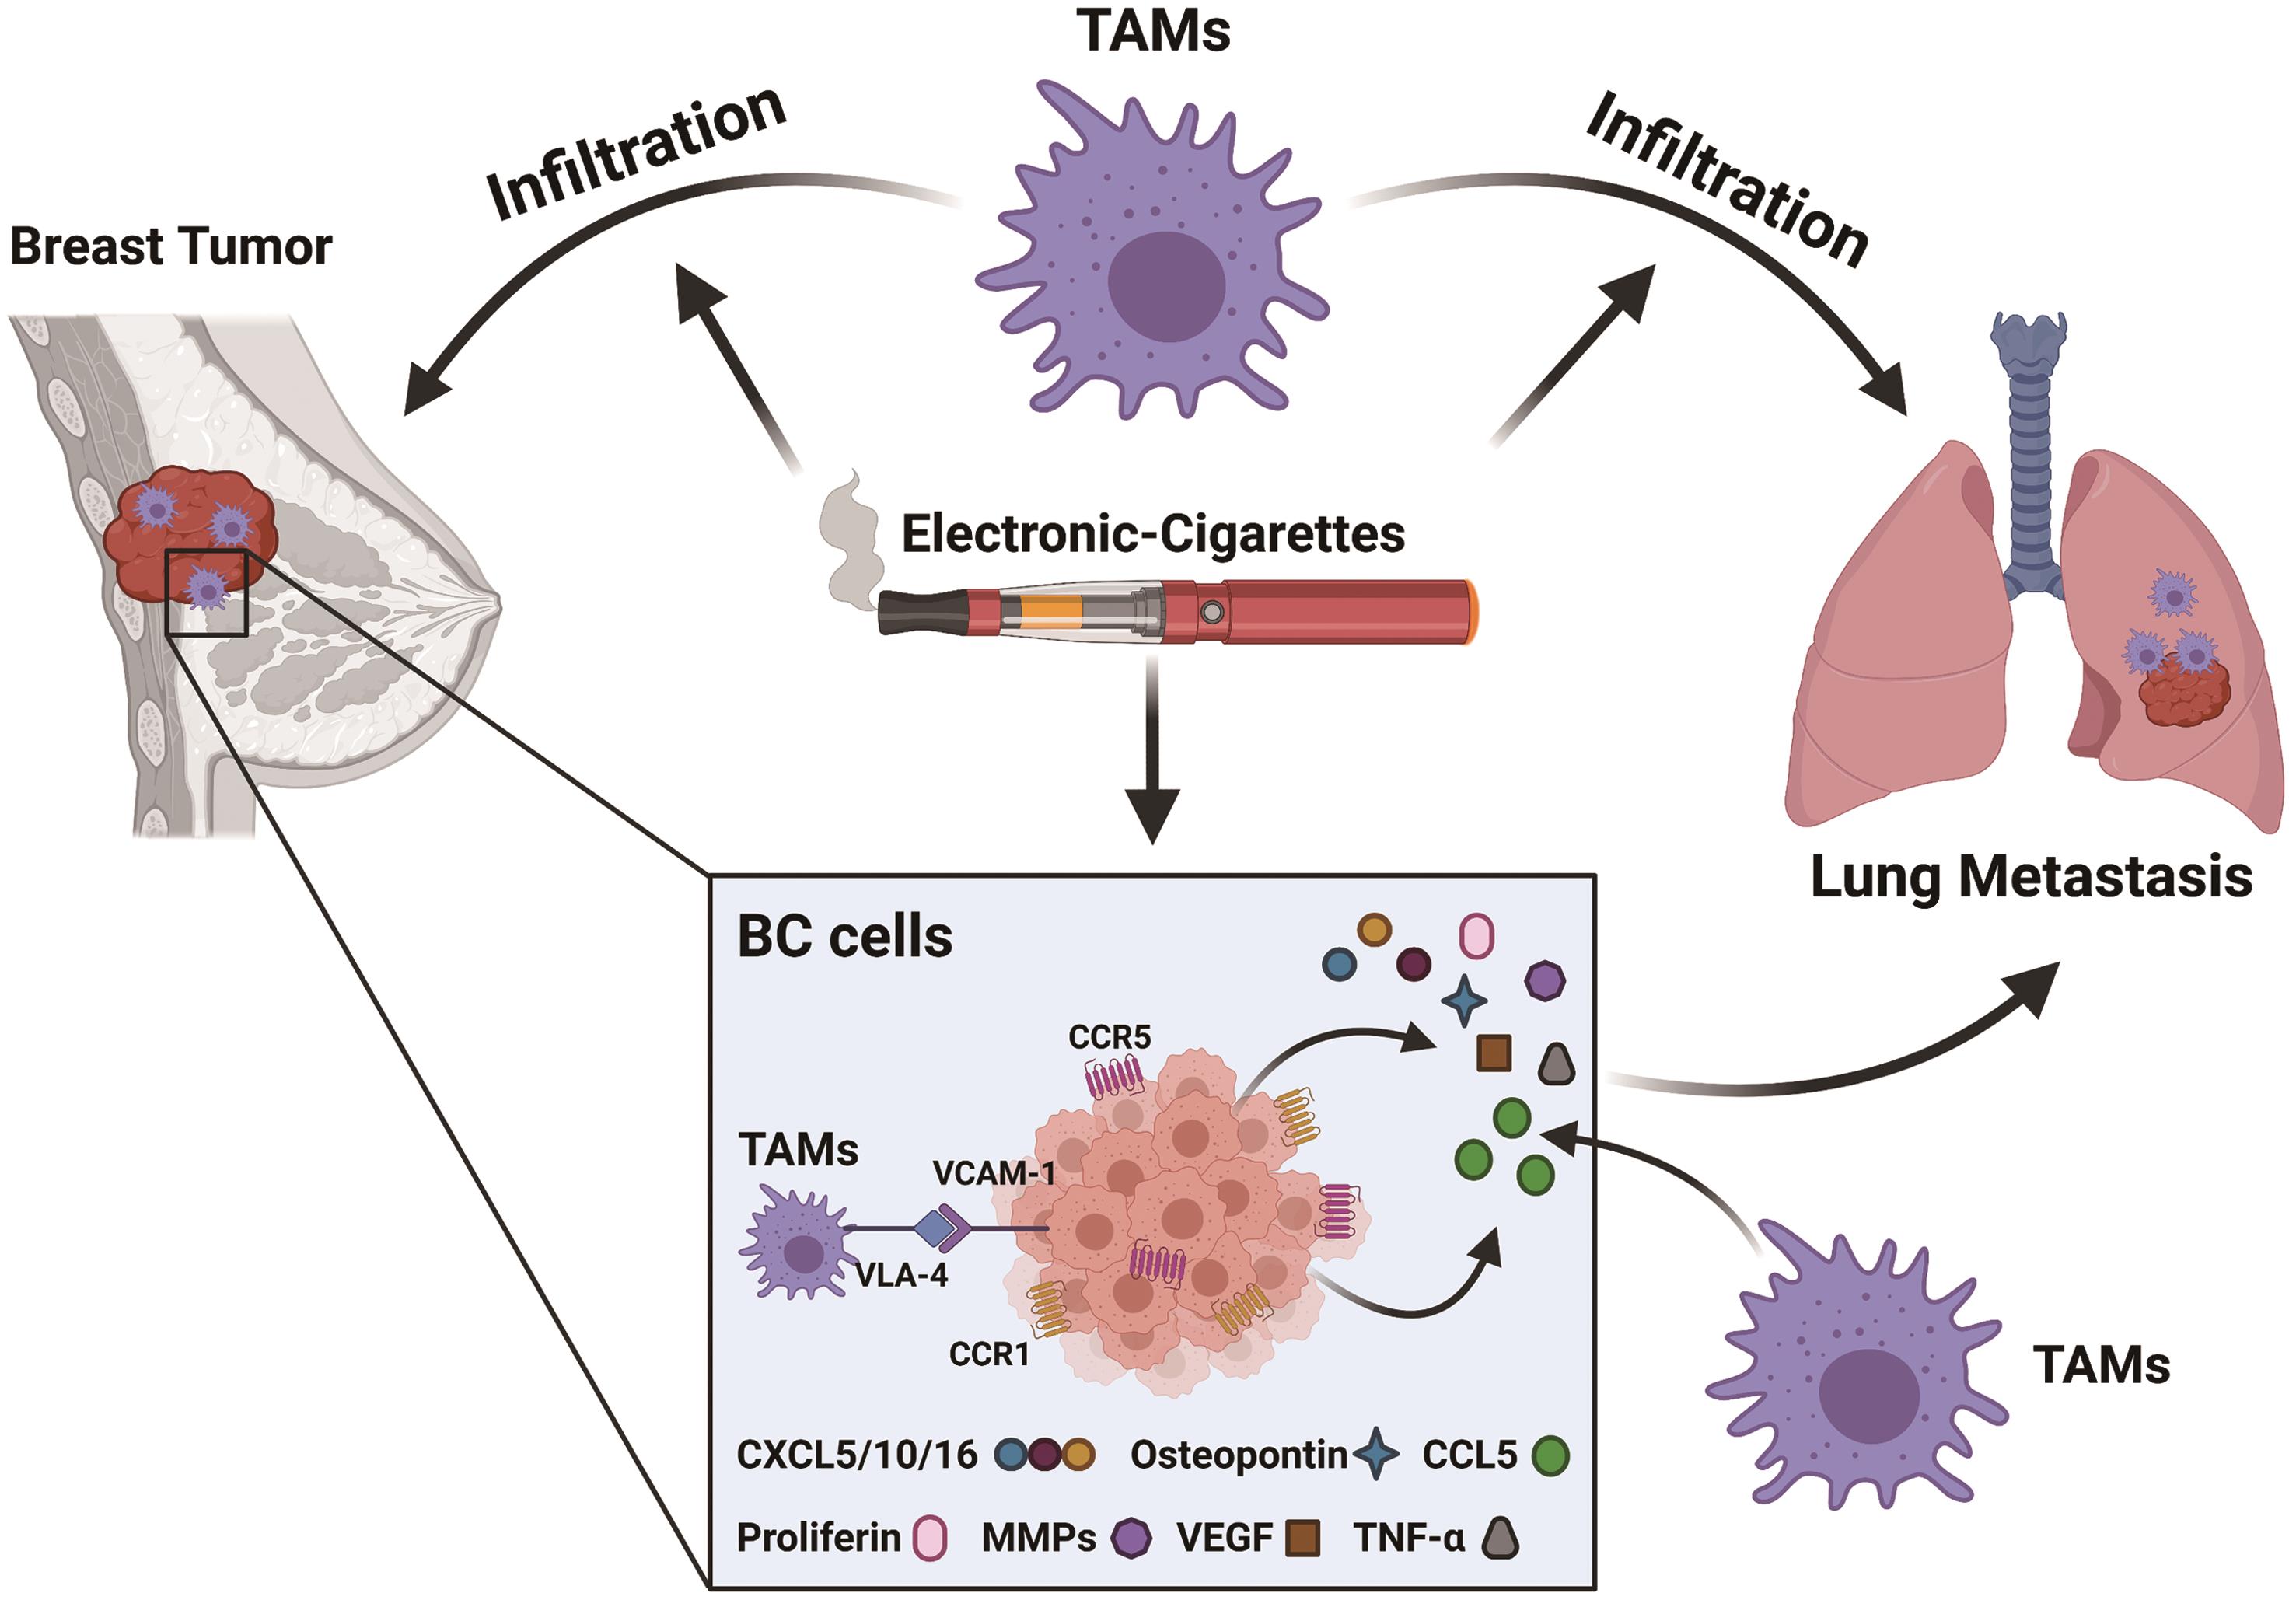 The schematic mechanisms of E-cigarettes (E-cig) that promotes breast cancer (BC) growth and lung metastasis.